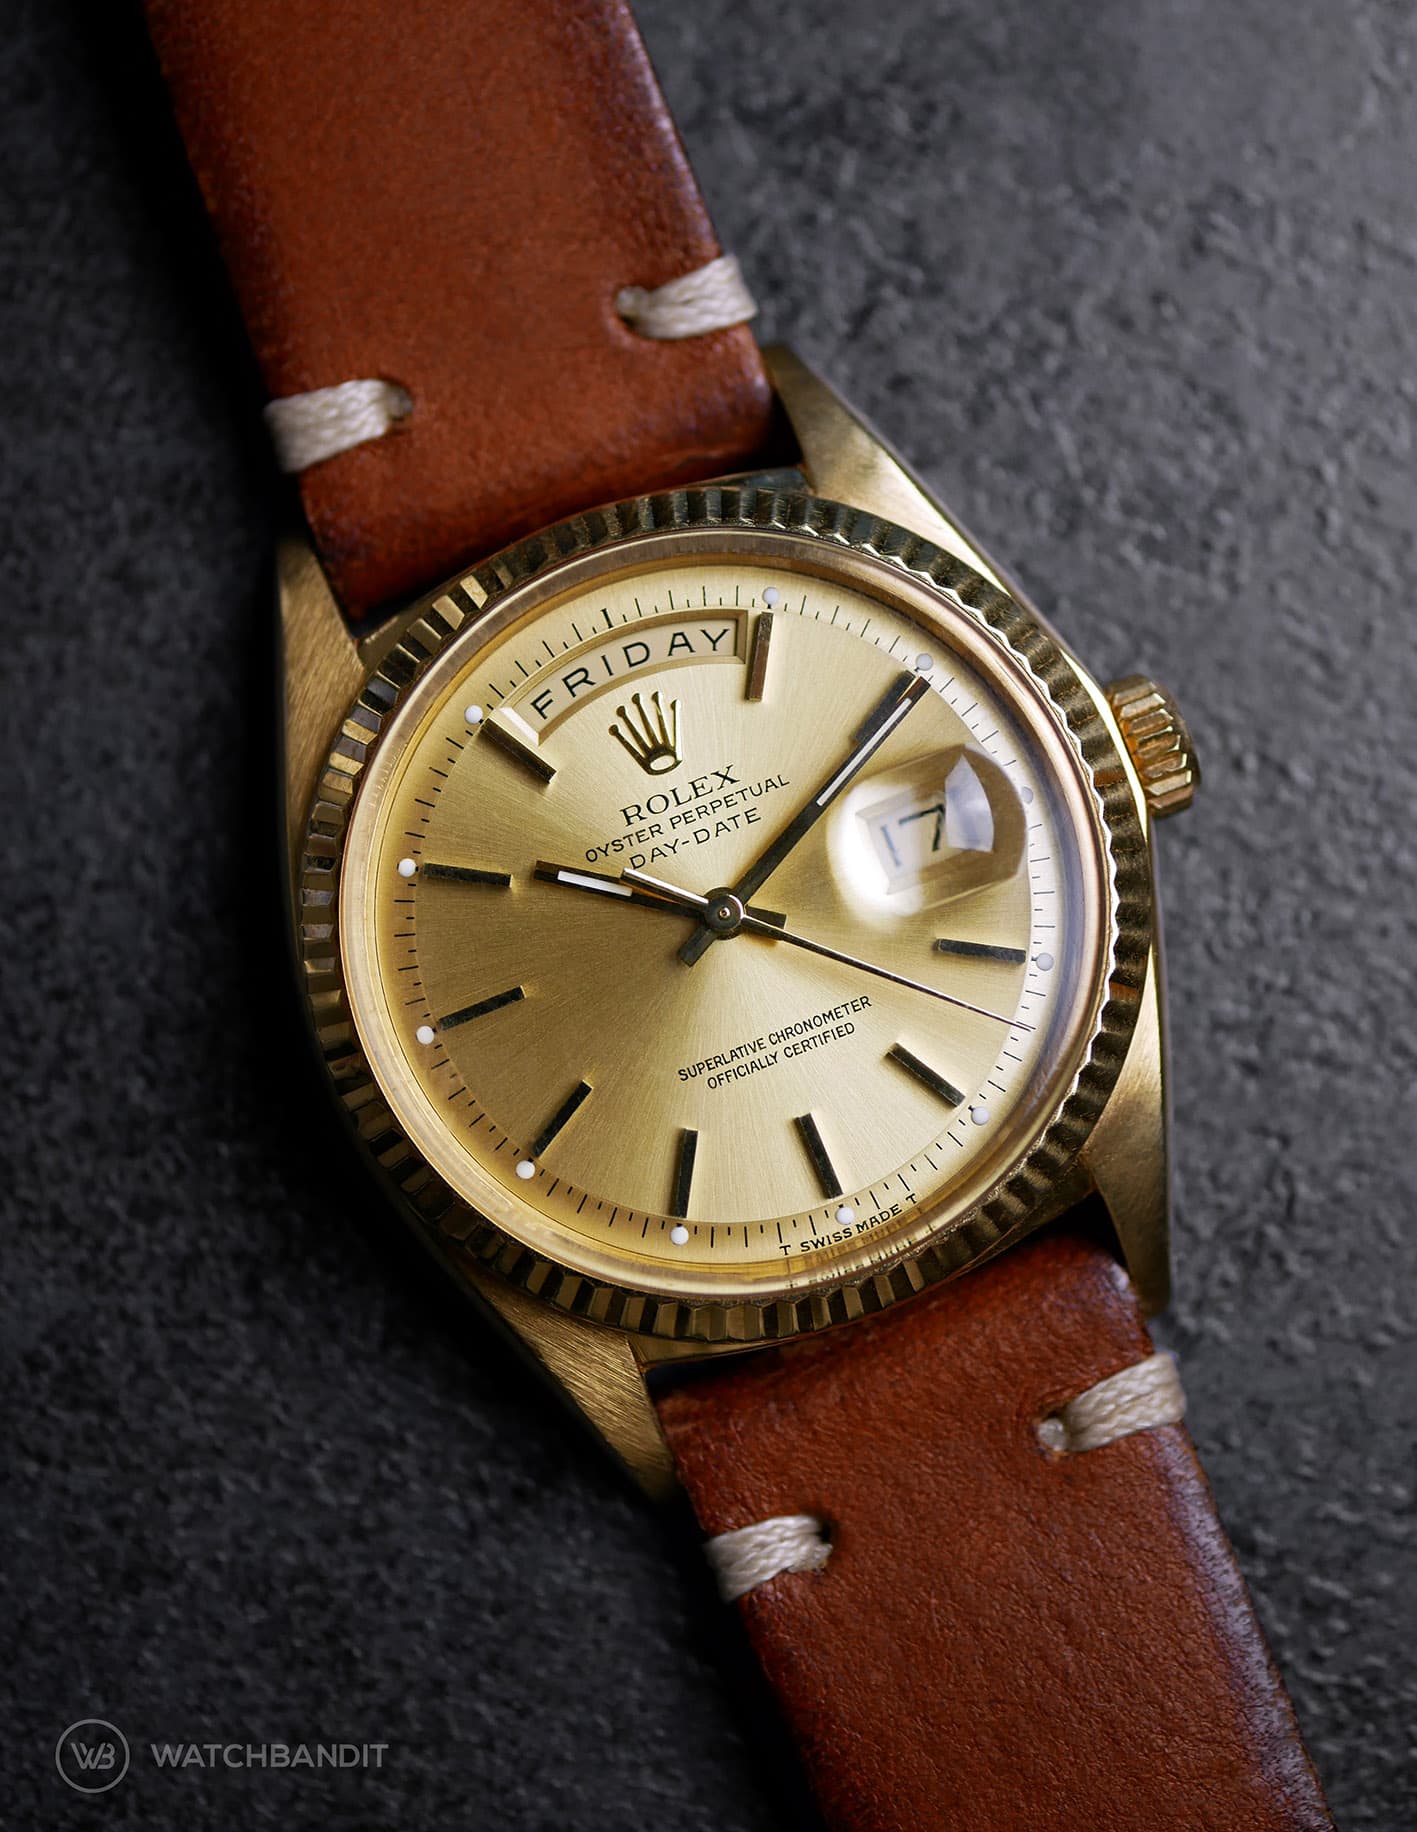 vintage leather watches